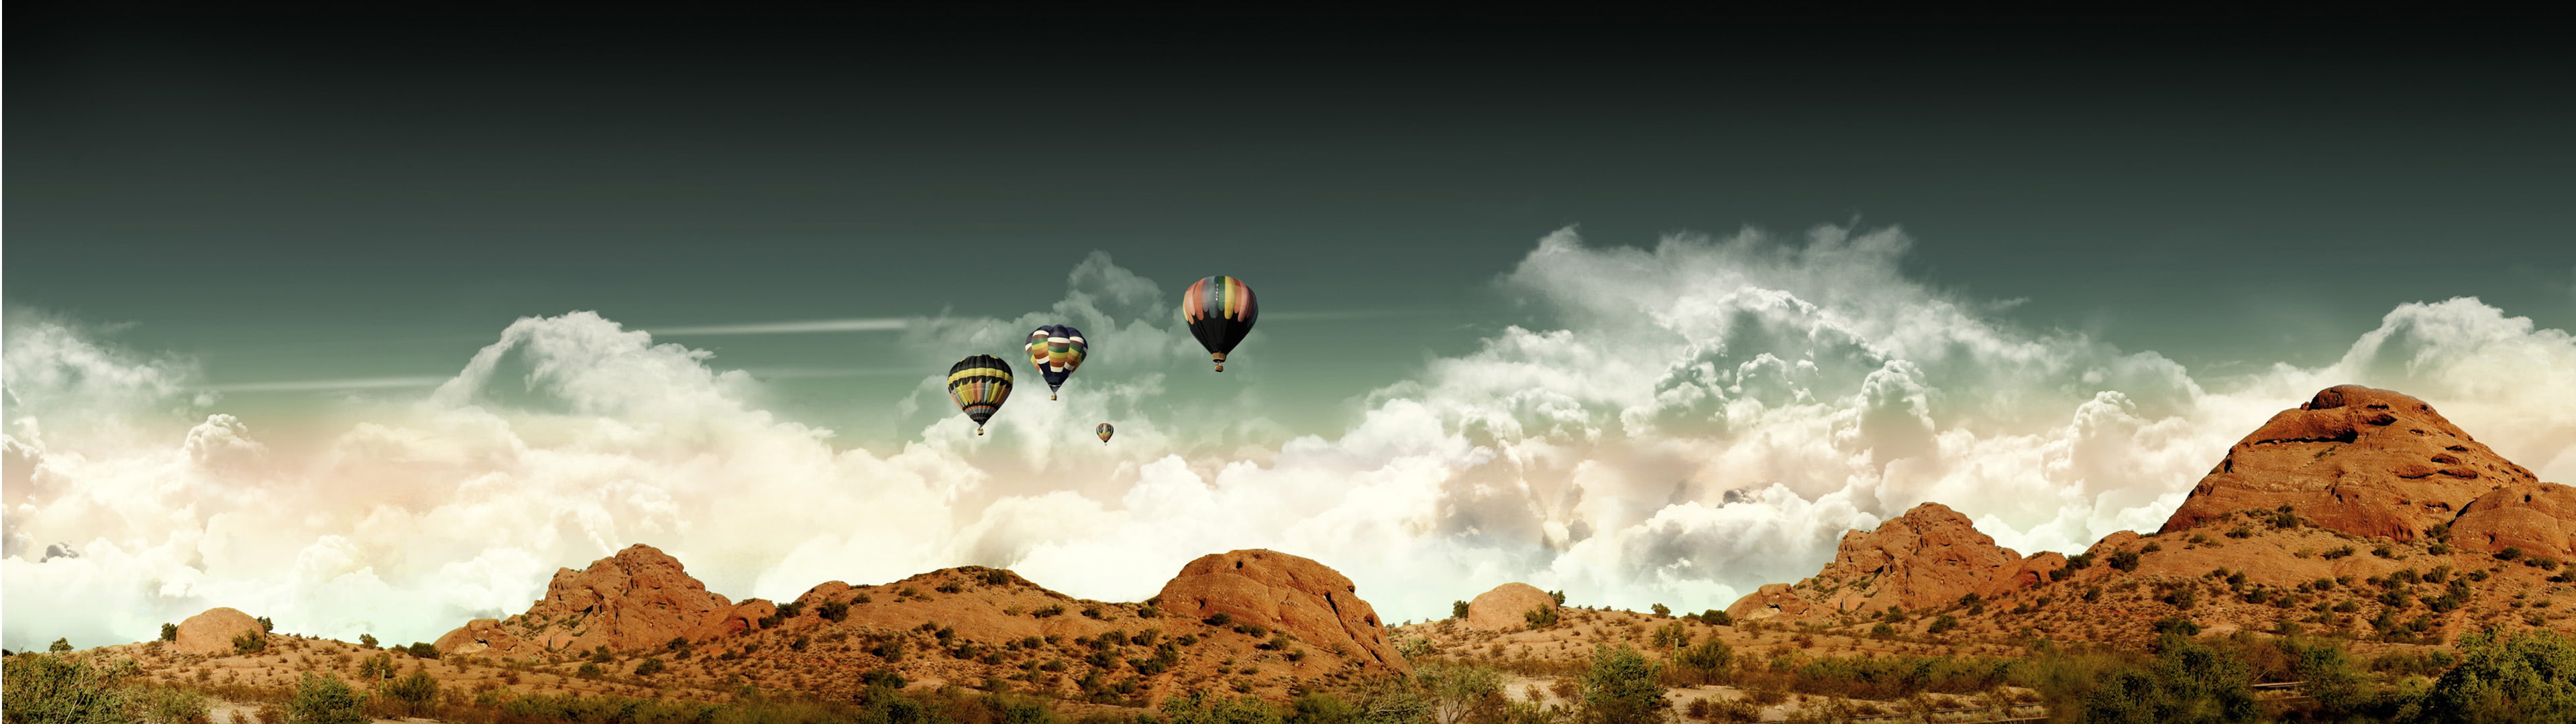 dual monitors multiple display hot air balloons mountains clouds desert landscape